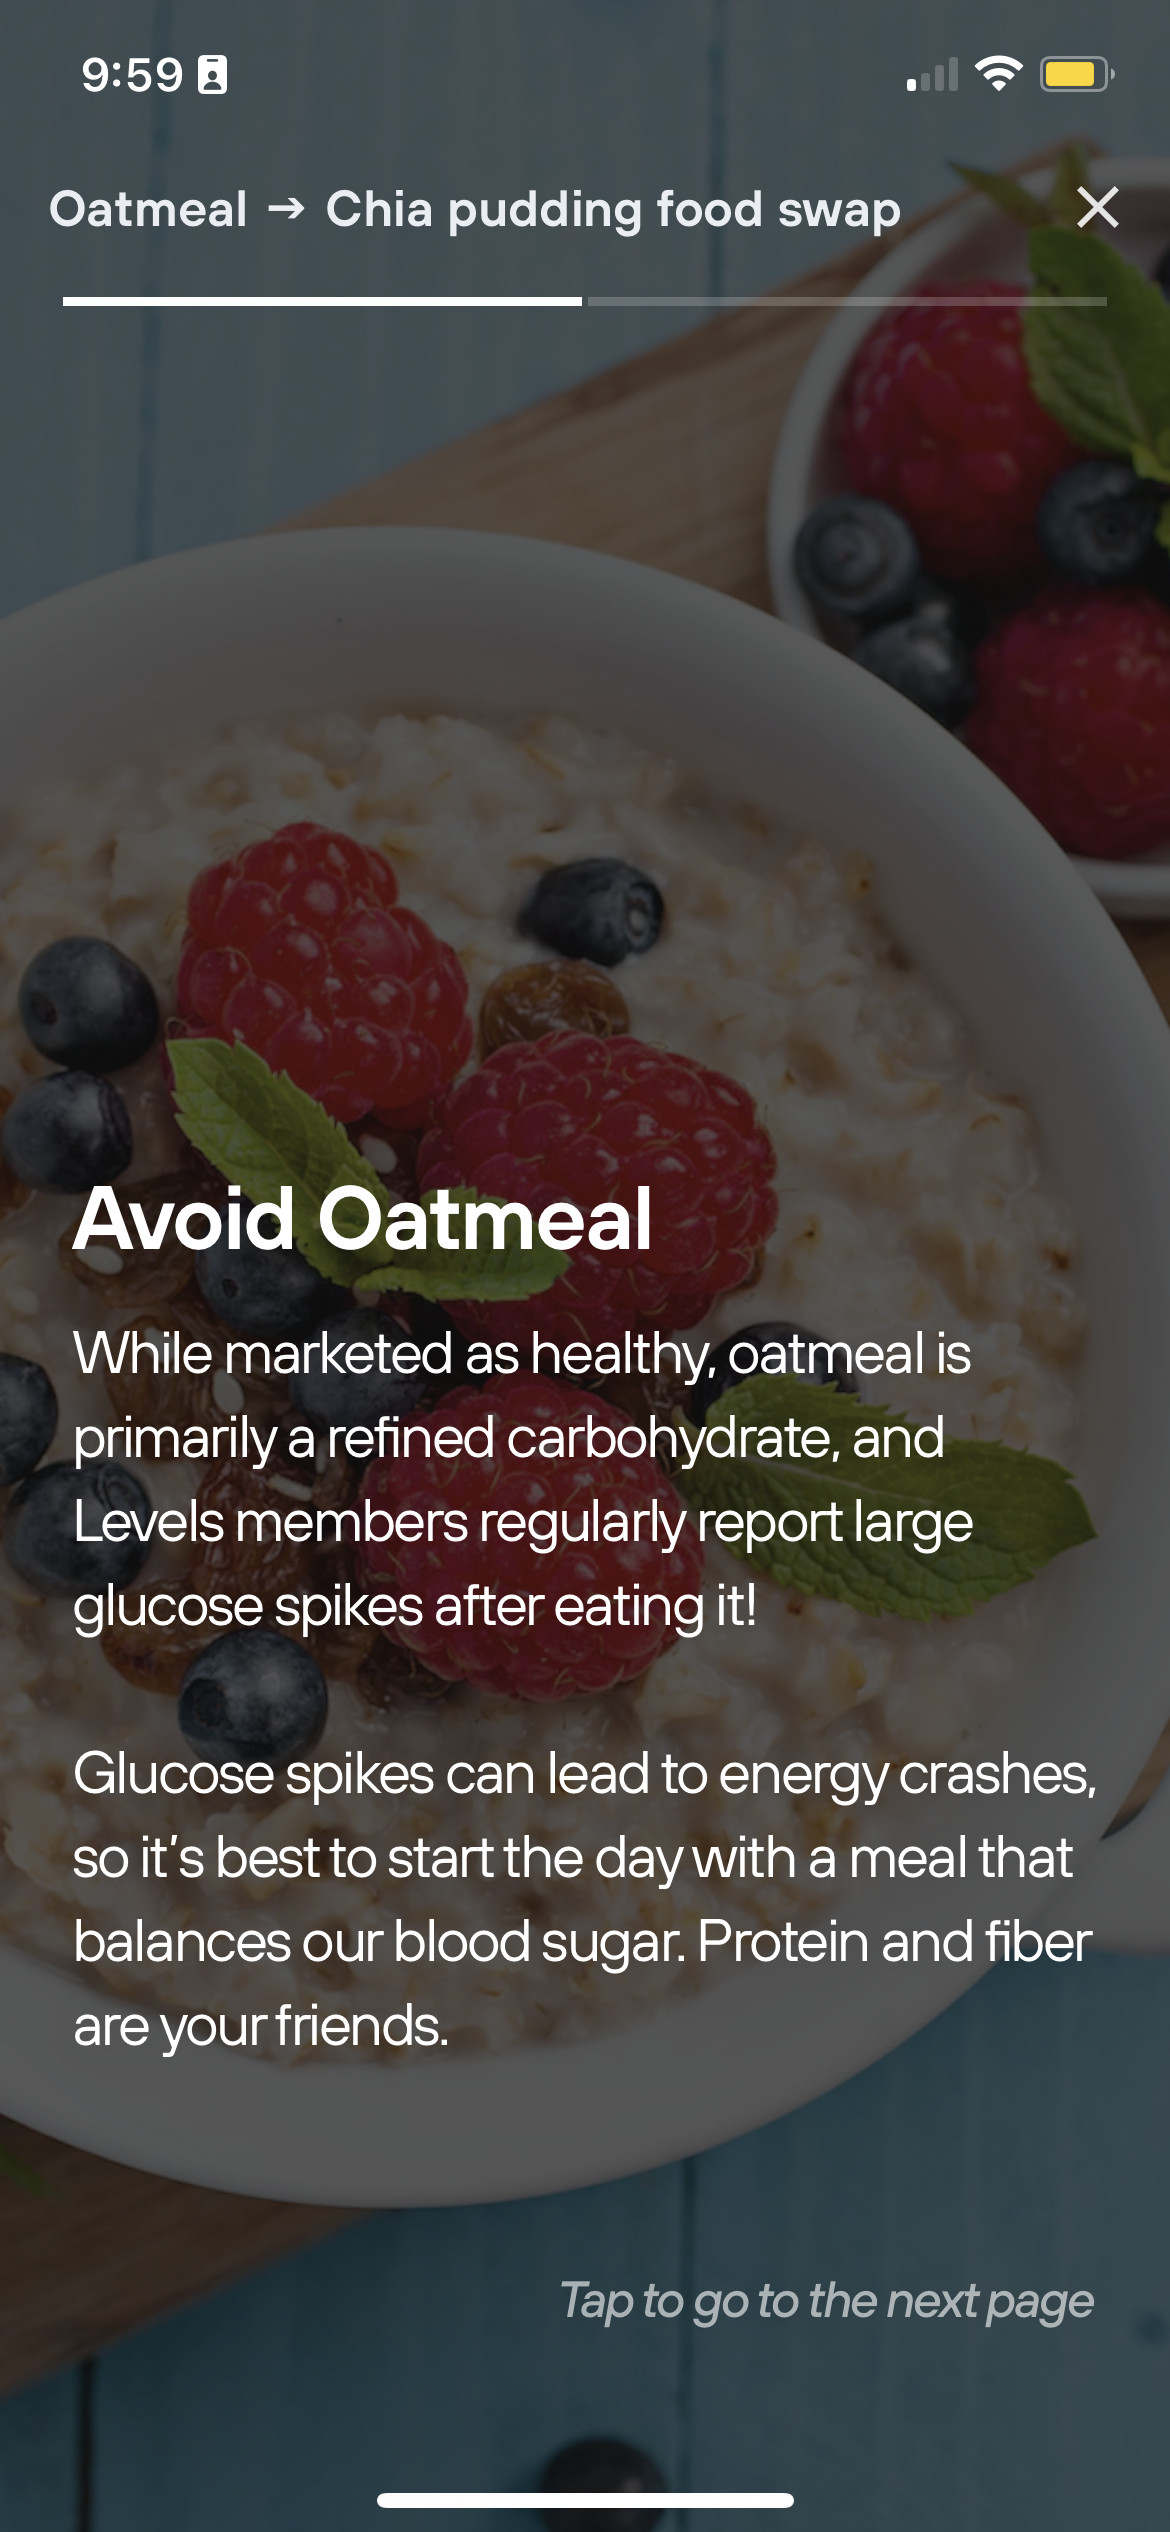 A screenshot of Nicole’s Dexcom and Levels app that says, “Avoid Oatmeal. While marked as healthy, oatmeal is a primarily refined carbohydrate, and Levels members regularly report large glucose spikes after eating it!  Glucose spikes can lead to energy crashes, so it’s best to start the day with a meal that balances our blood sugar. Protein and fiber are your friends.”